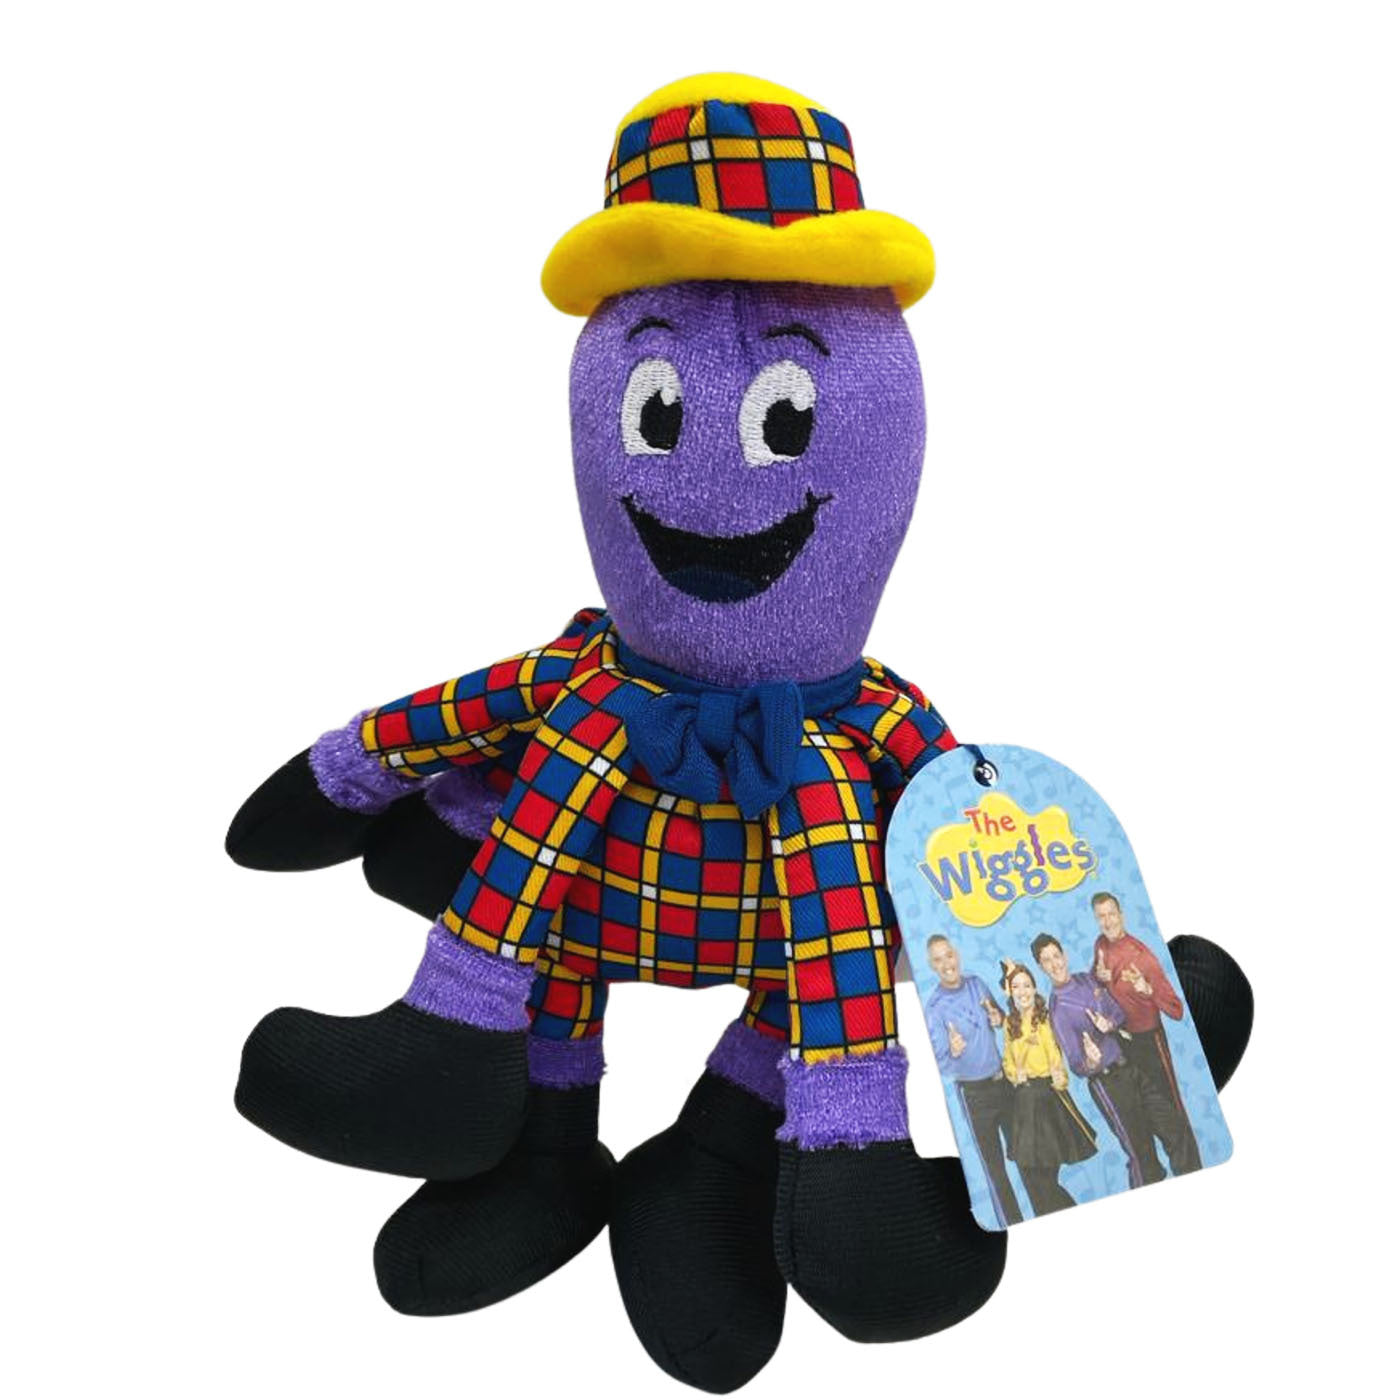 The Wiggles Plush - Henry the Octopus